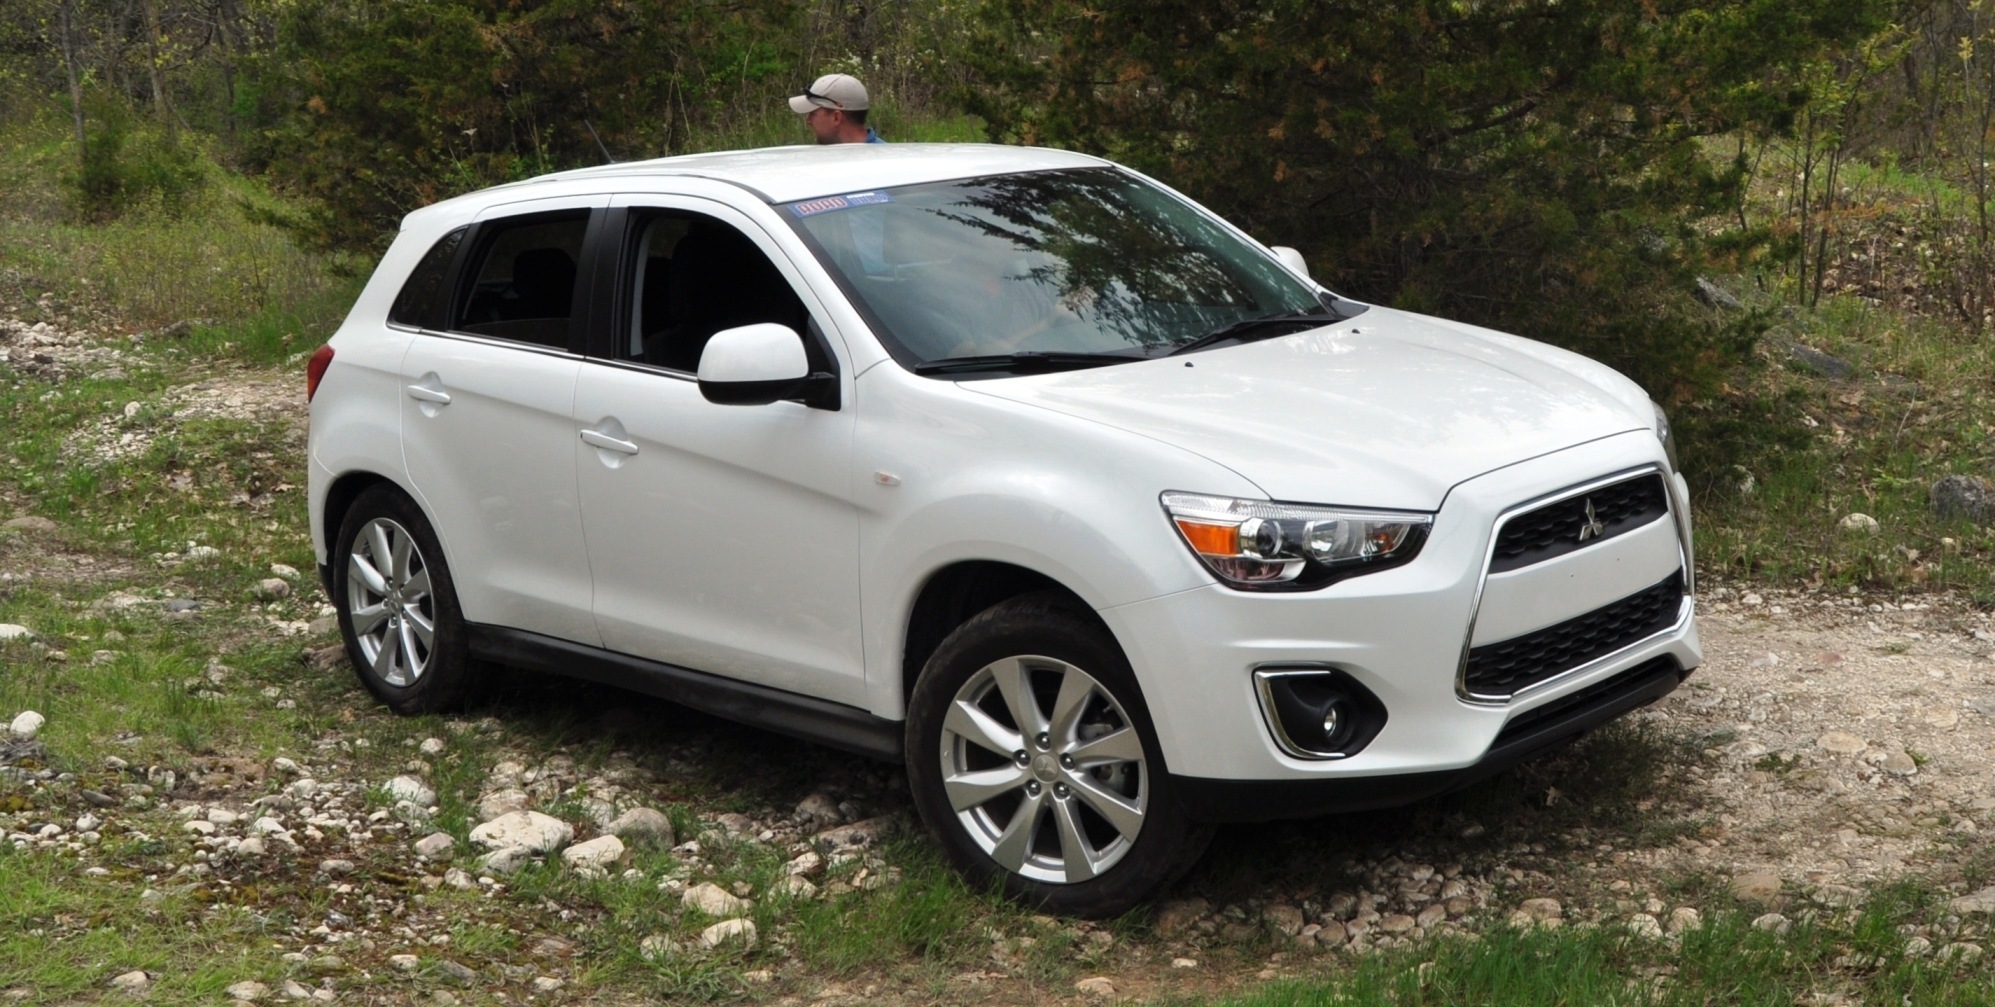 2015 Mitsubishi Outlander Sport Revamped with Cool LED Running Lights ...